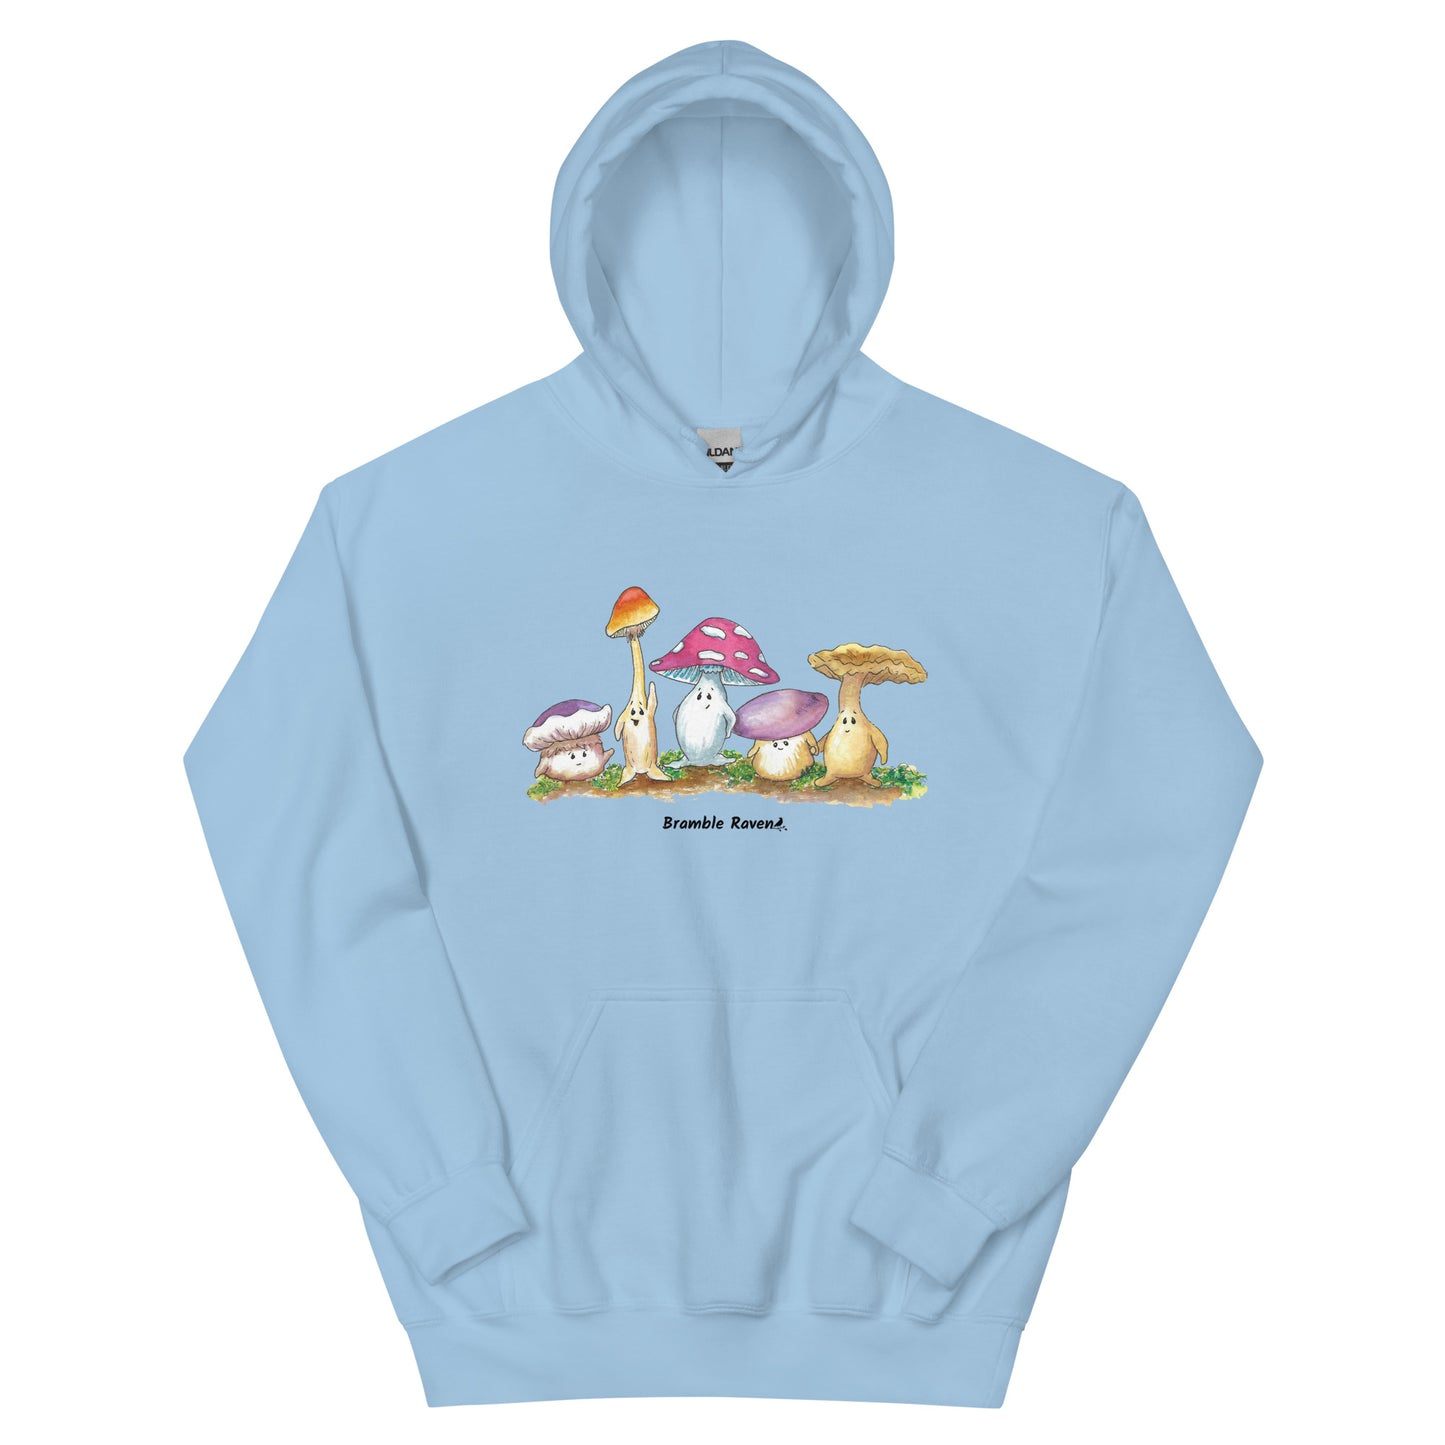 Light blue colored unisex cotton/polyester blend hoodie. Features front design of Mushy and his whimsical mushroom friends. Hoodie has double lined hood, front pouch pocket, rib knit cuffs and stretchy waistband.